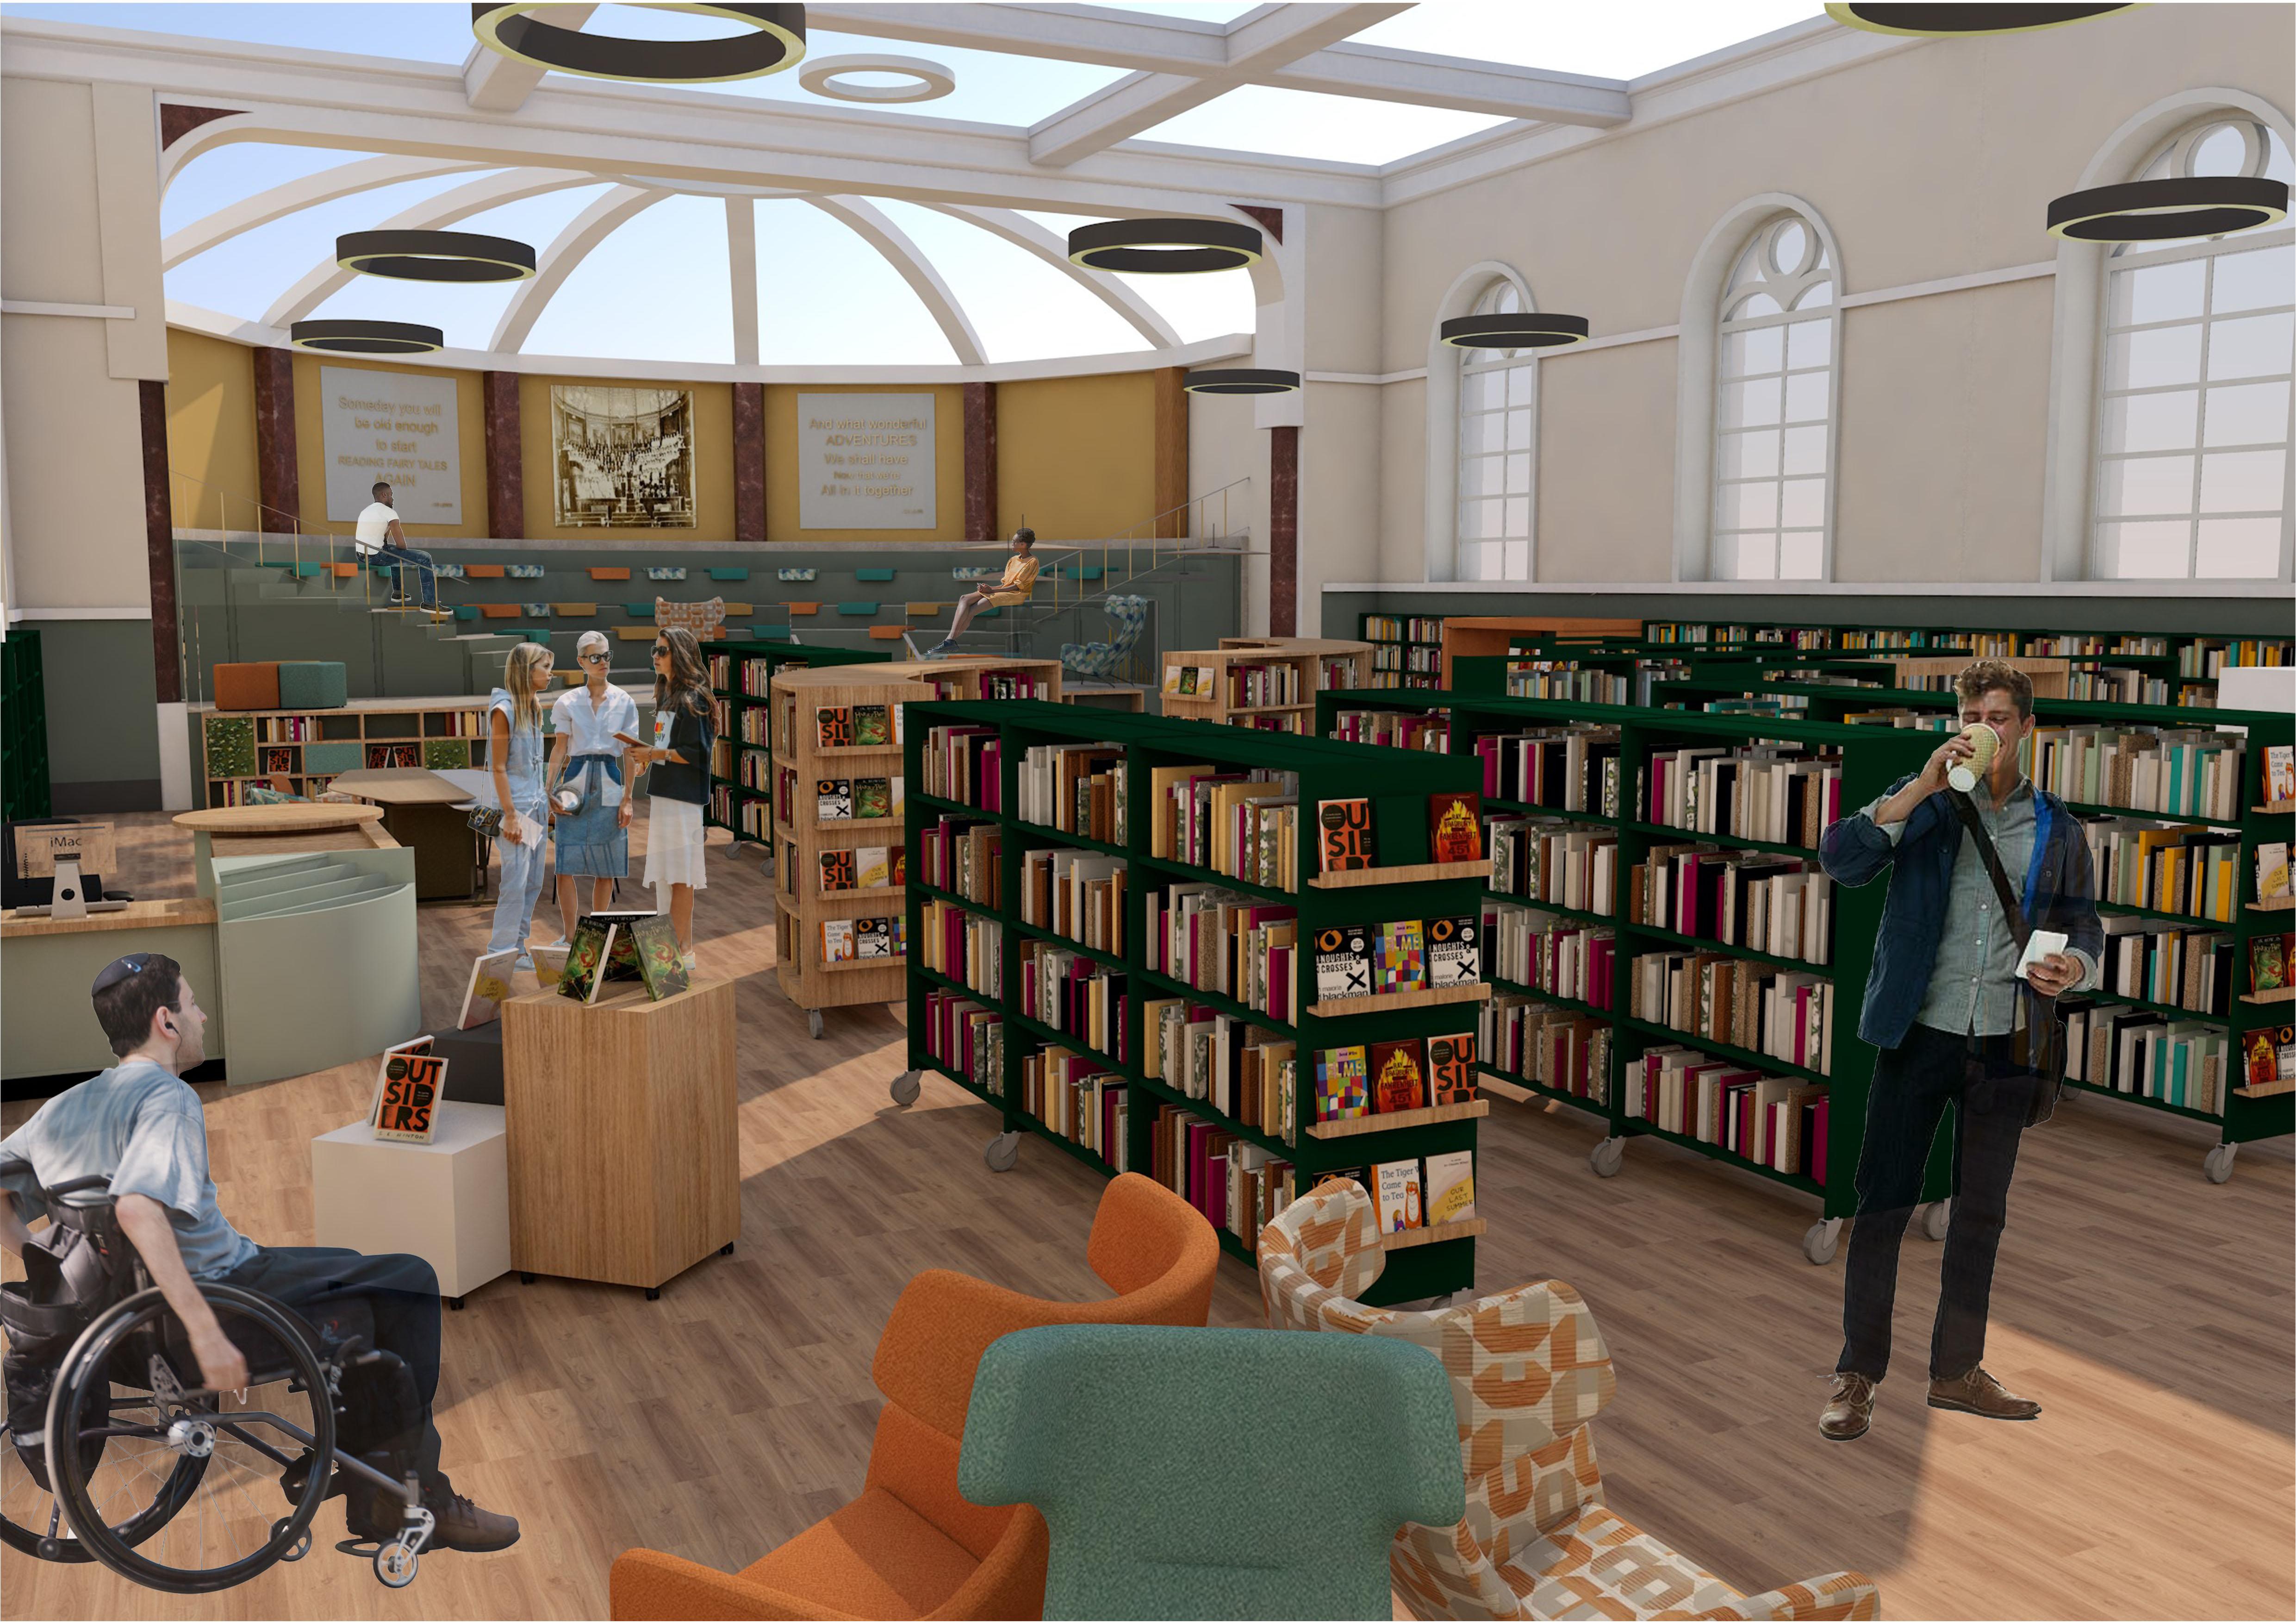 Artist impression of library in Shirehall